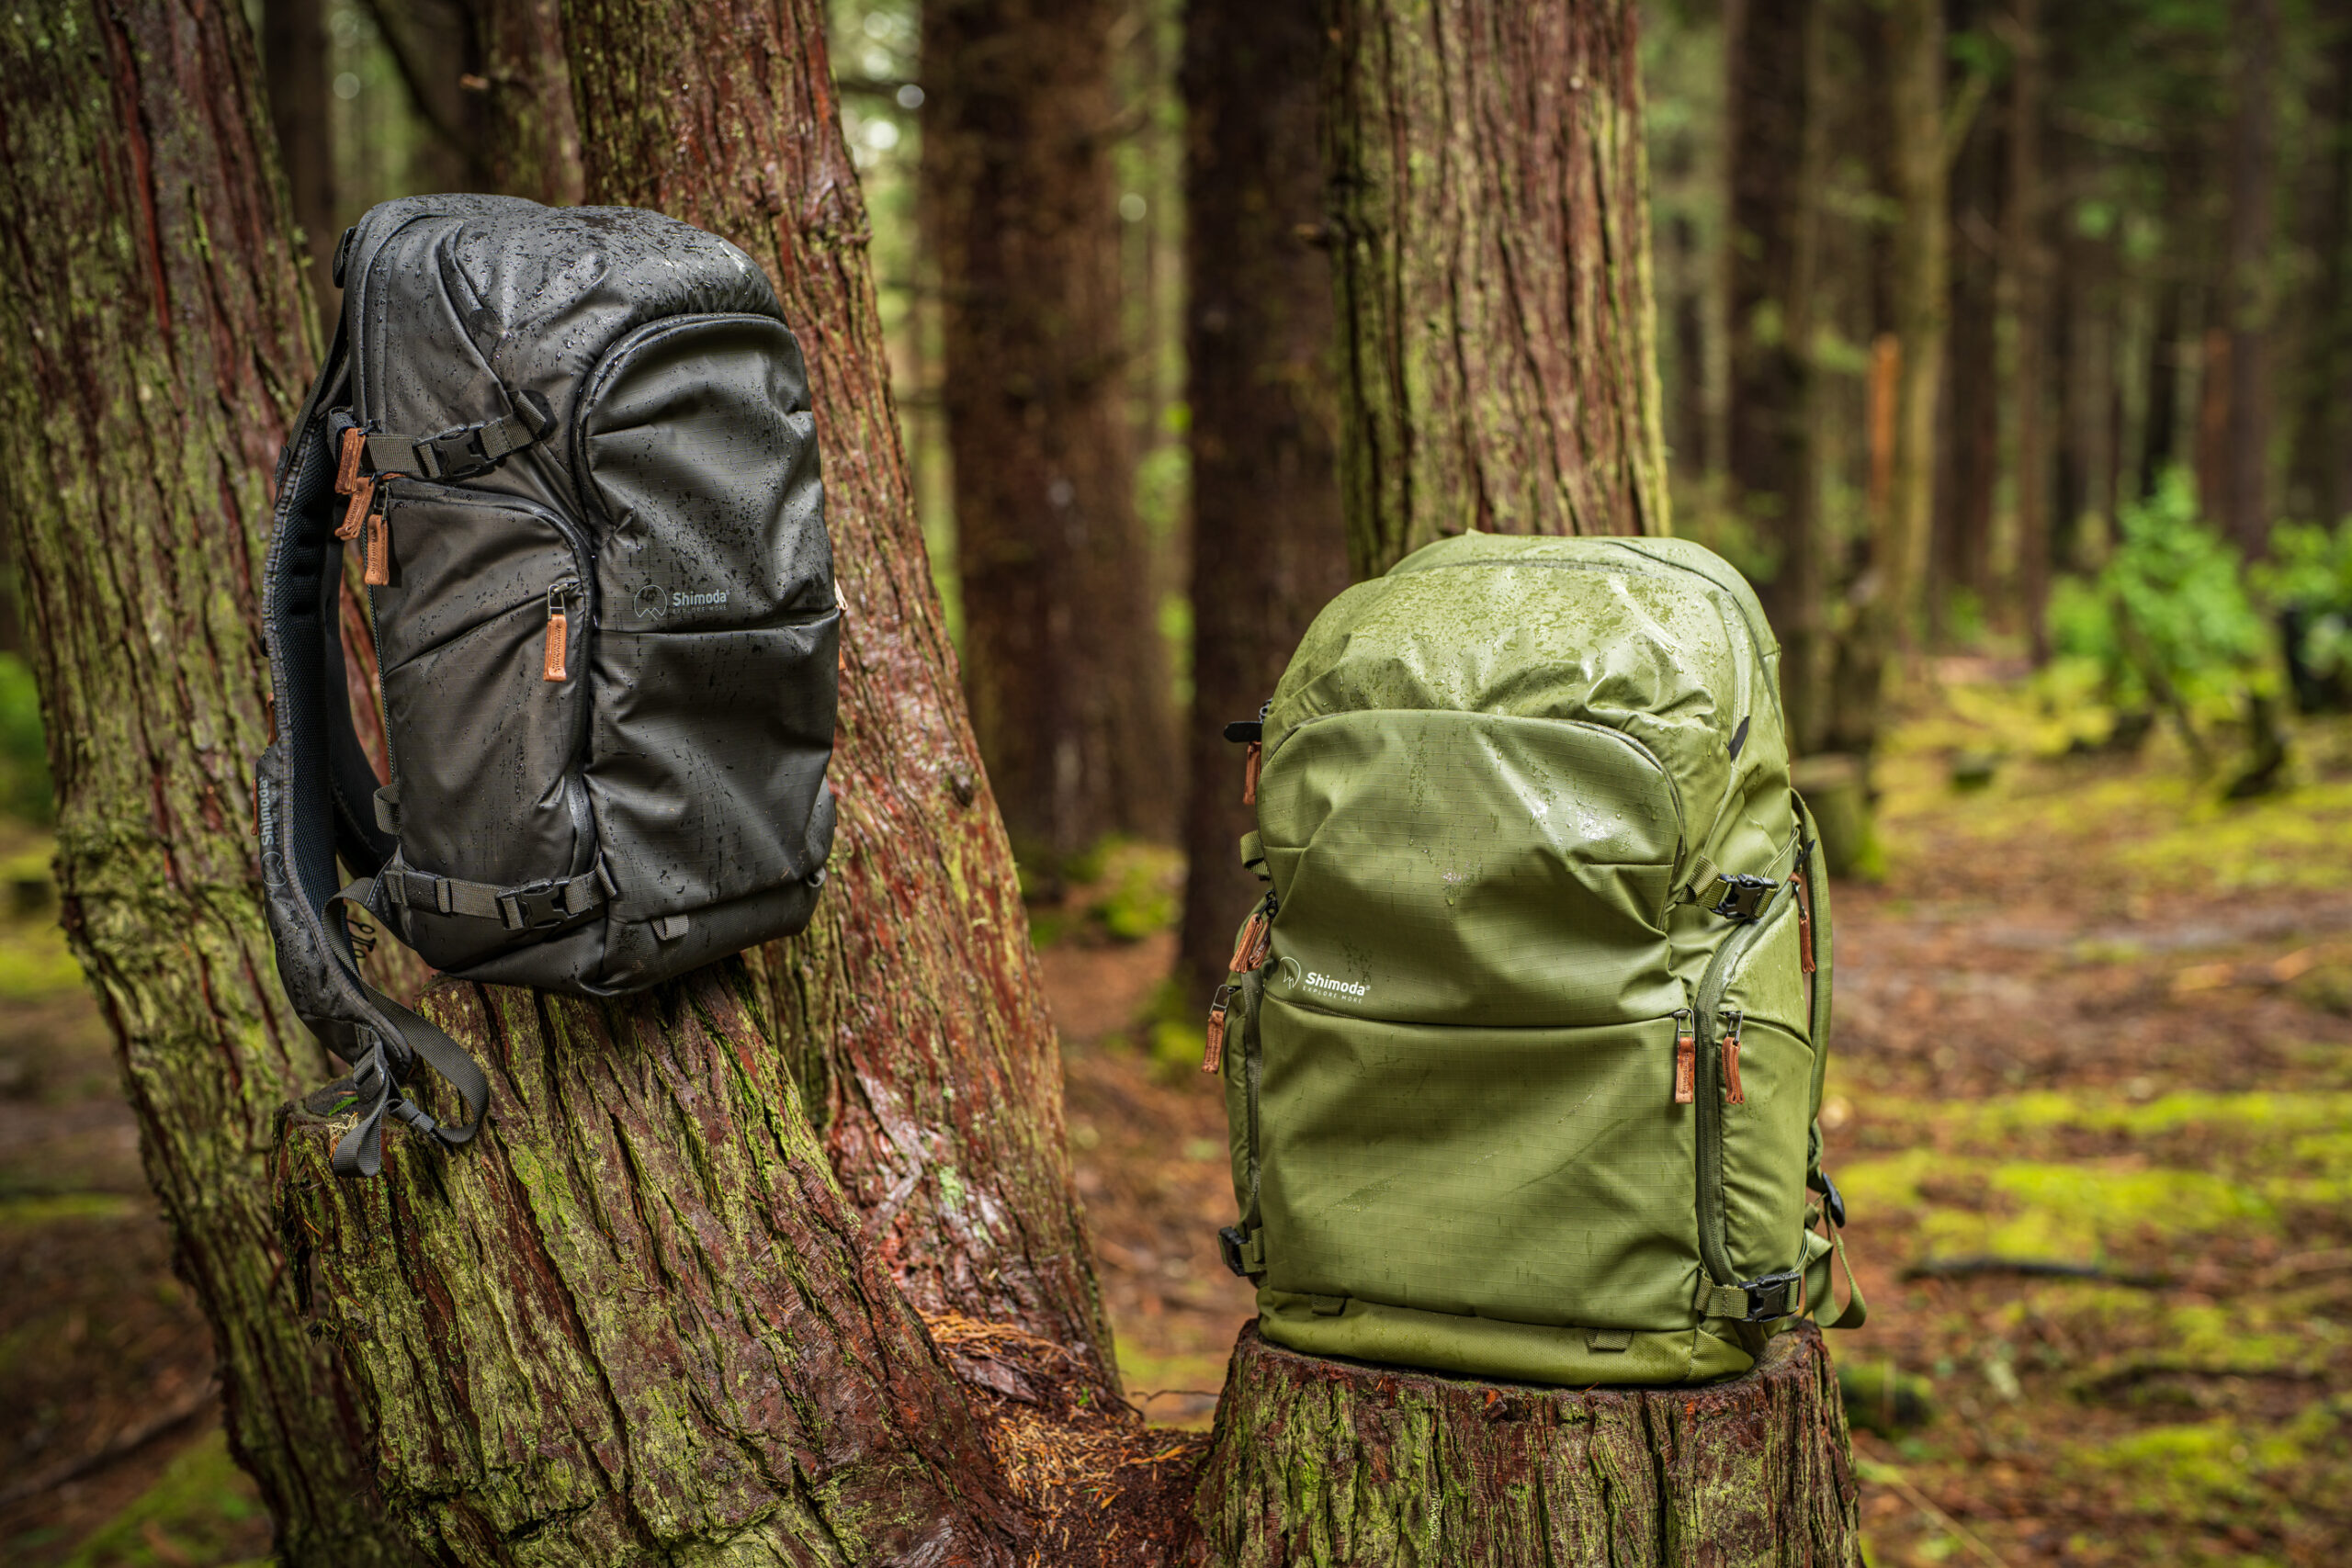 The Best Camera Bags For Hiking and Backpacking